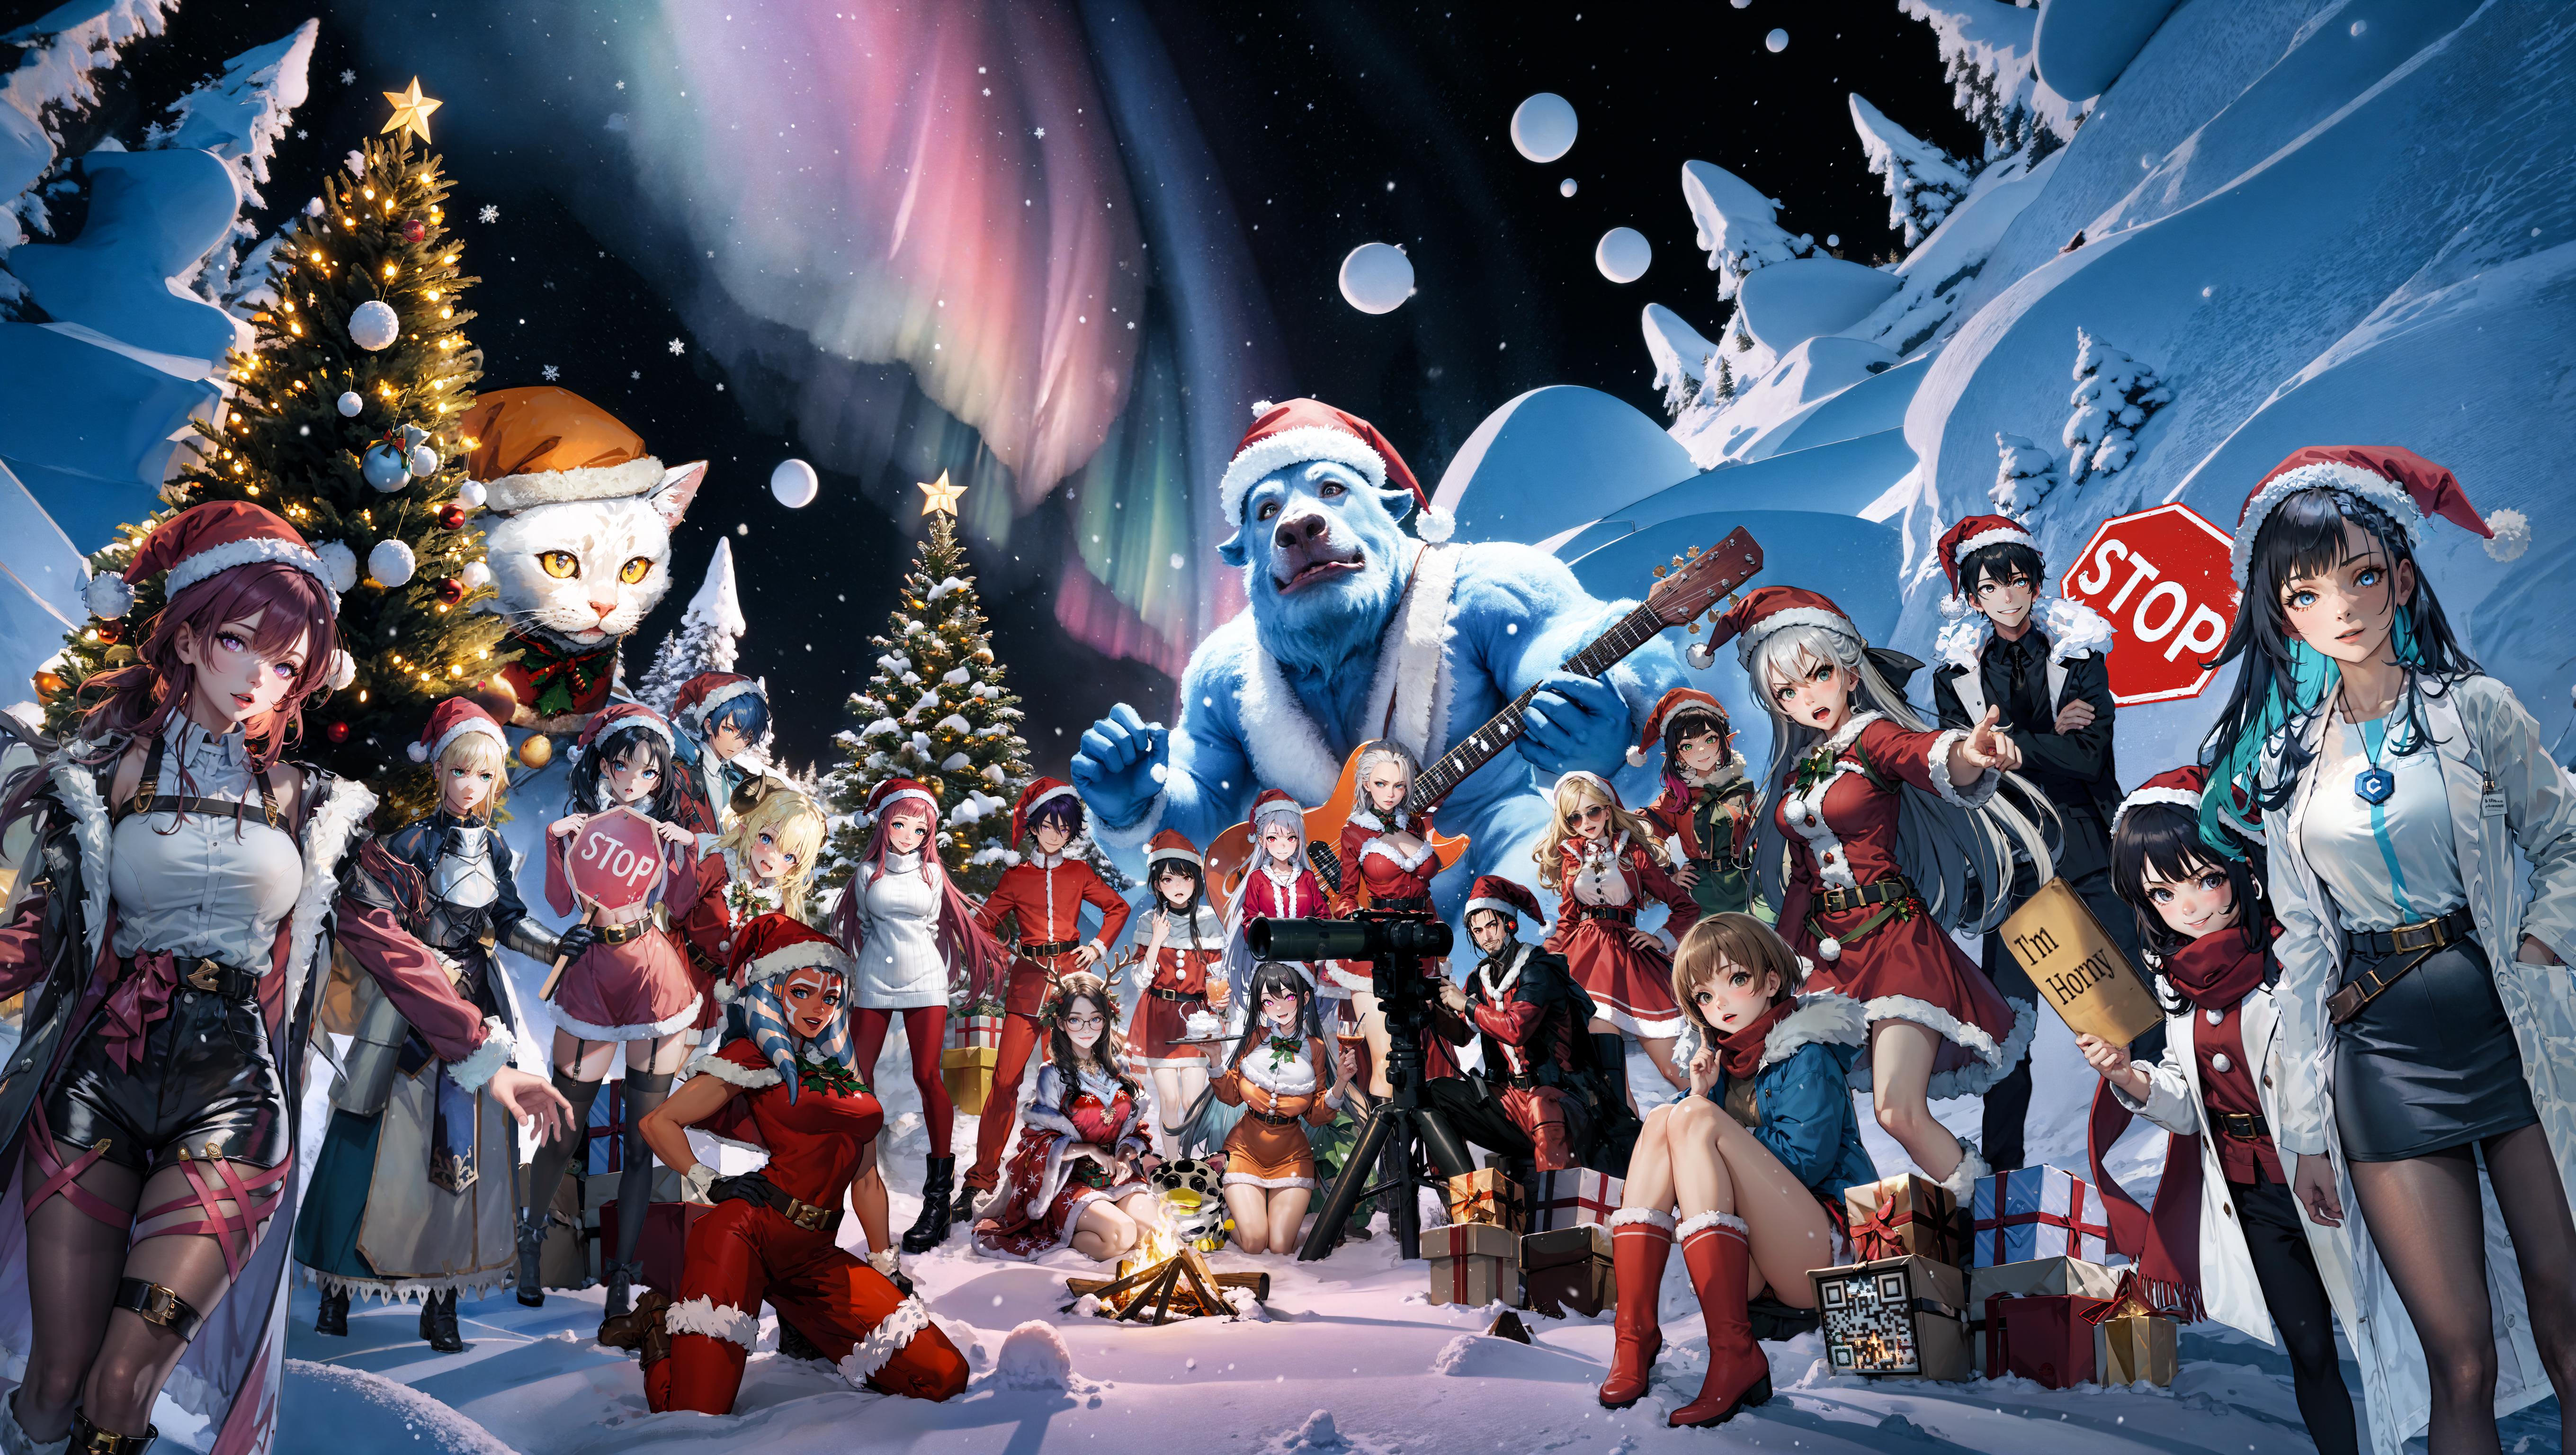 A Christmas card featuring a group of cartoon characters posing in front of a Christmas tree. The characters are dressed in winter clothing and are of various sizes and poses. Some of them are holding guitars, while others are holding presents. The scene appears to be set in a snowy landscape, with a beautiful color scheme including pink, blue, and purple hues. The characters are arranged in a visually appealing manner, making the card a festive and joyful representation of the holiday season.